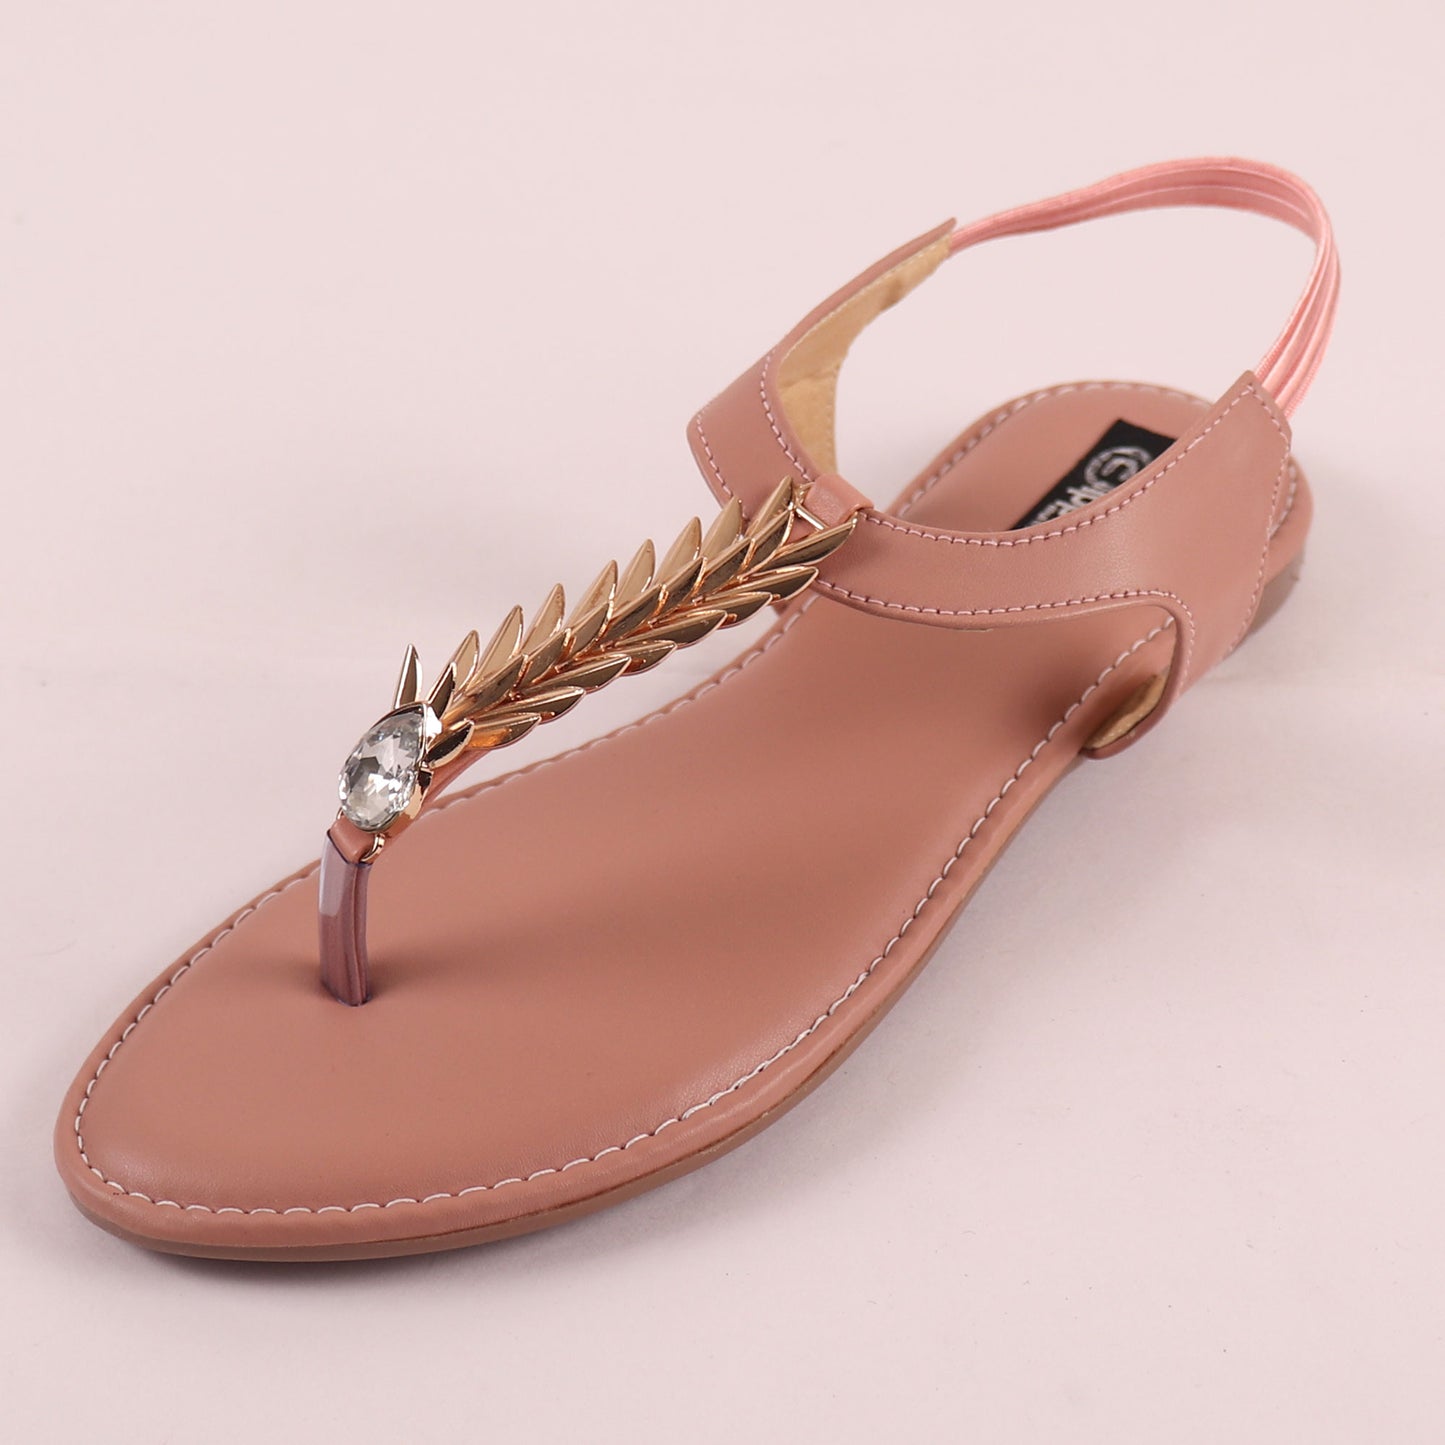 Foot Wear,The Palm Branch Flats in Pink - Cippele Multi Store